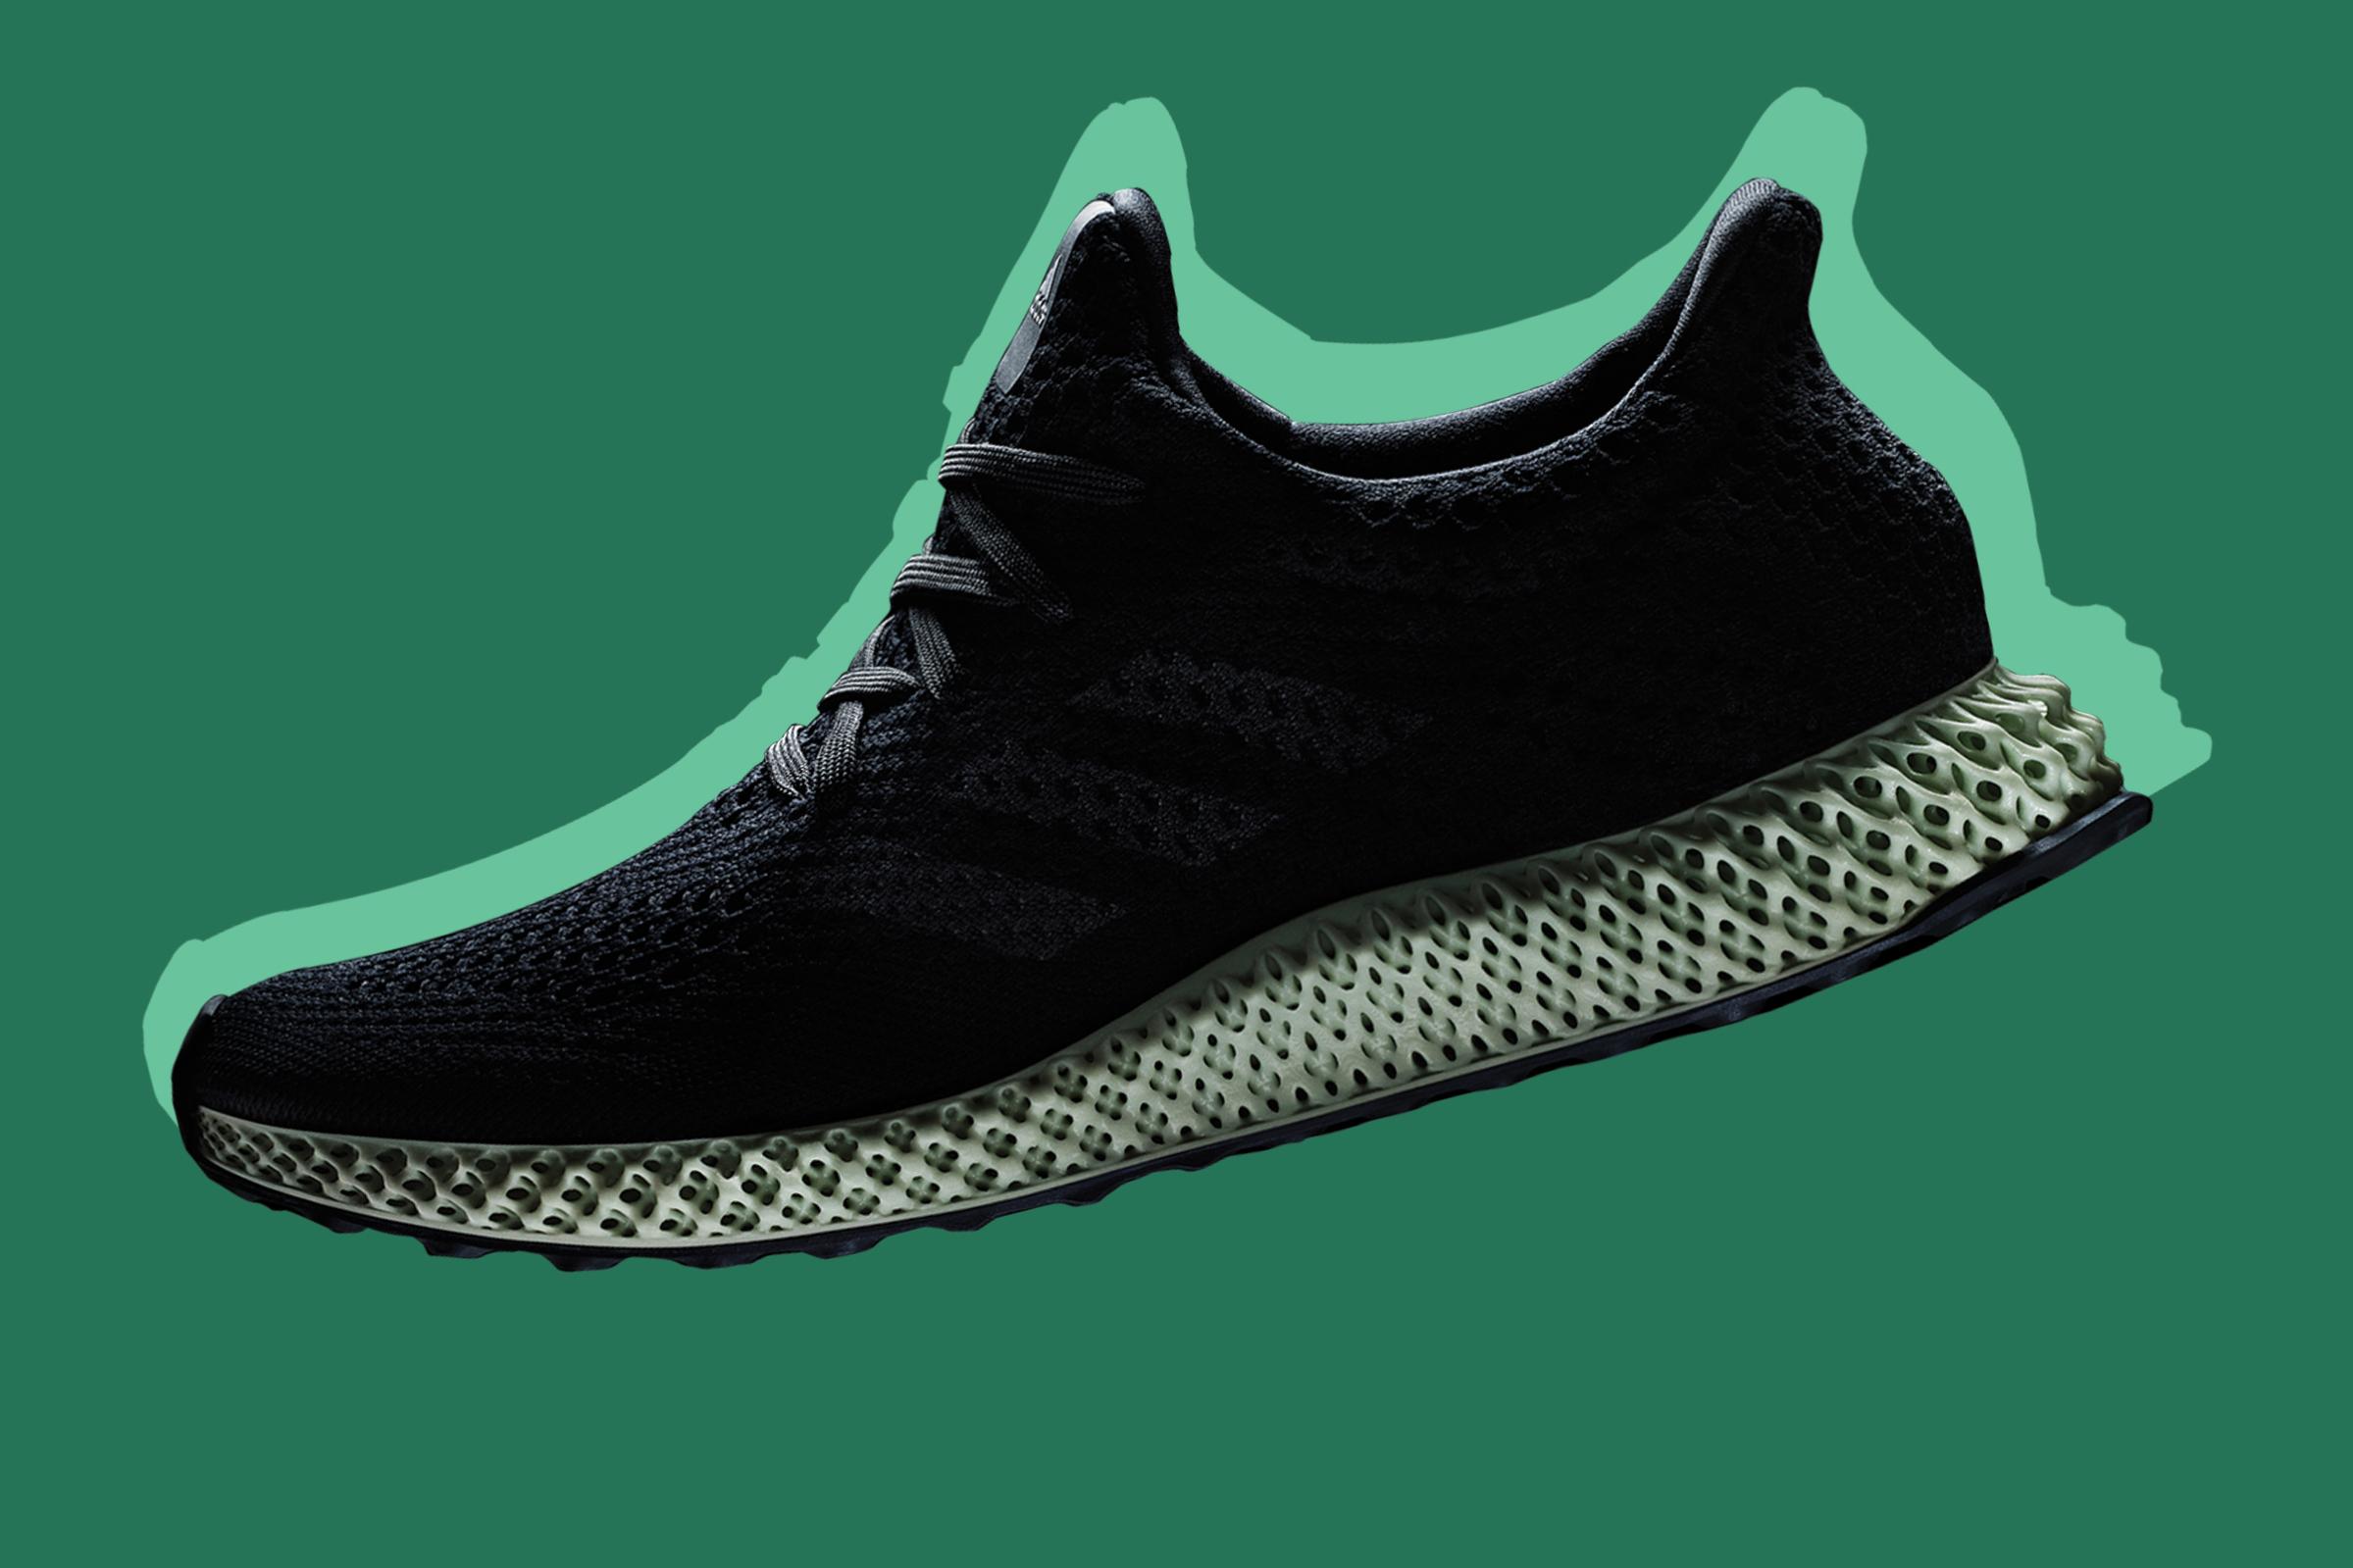 The Adidas Futurecraft 4D is one of the best inventions of 2017